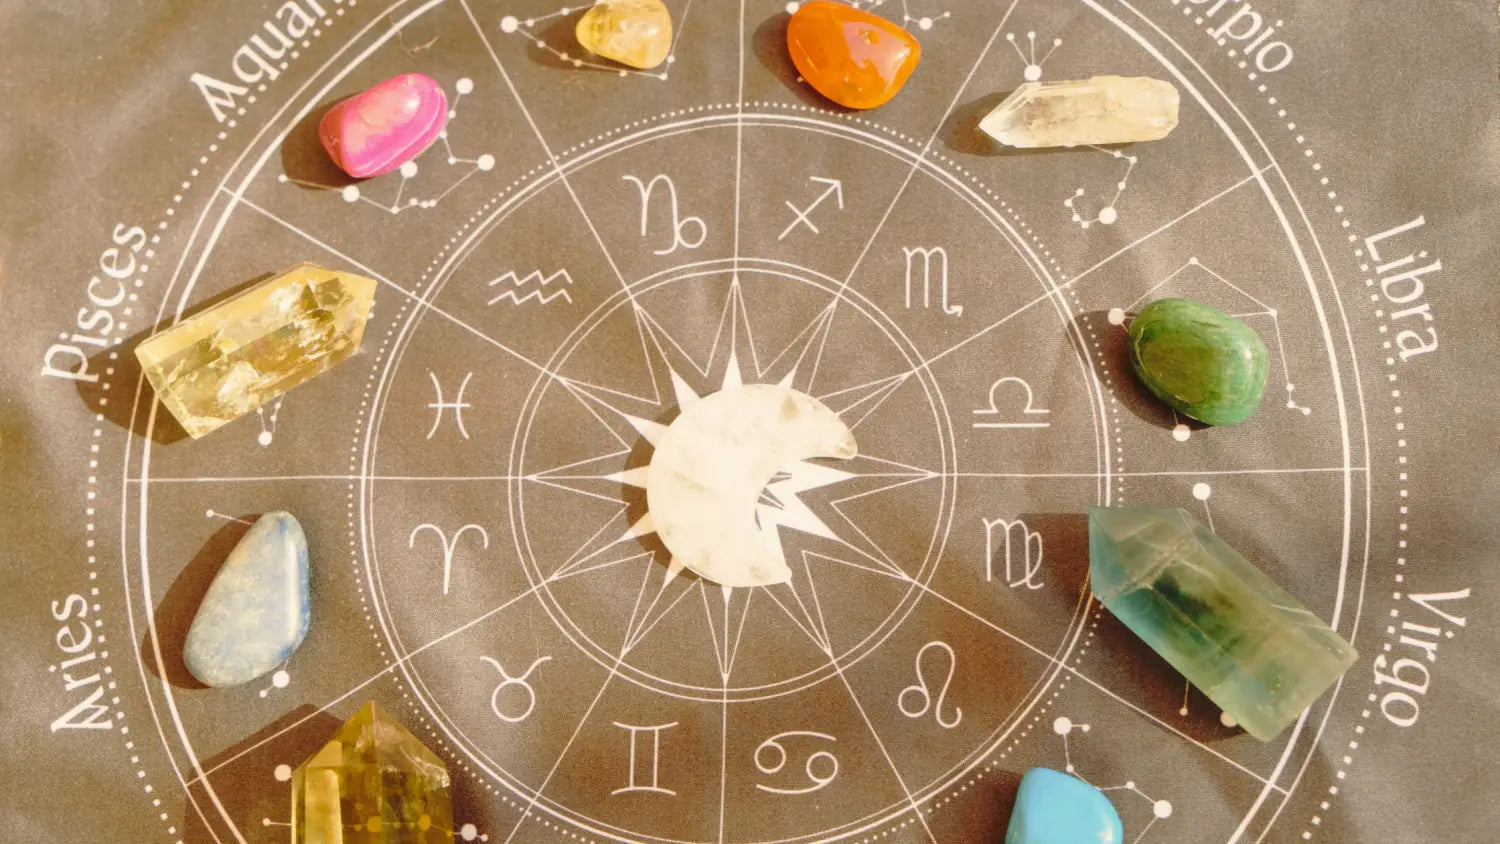 Discover Your Birthstone: The Ultimate Healing Crystal Guide - The Boho Depot